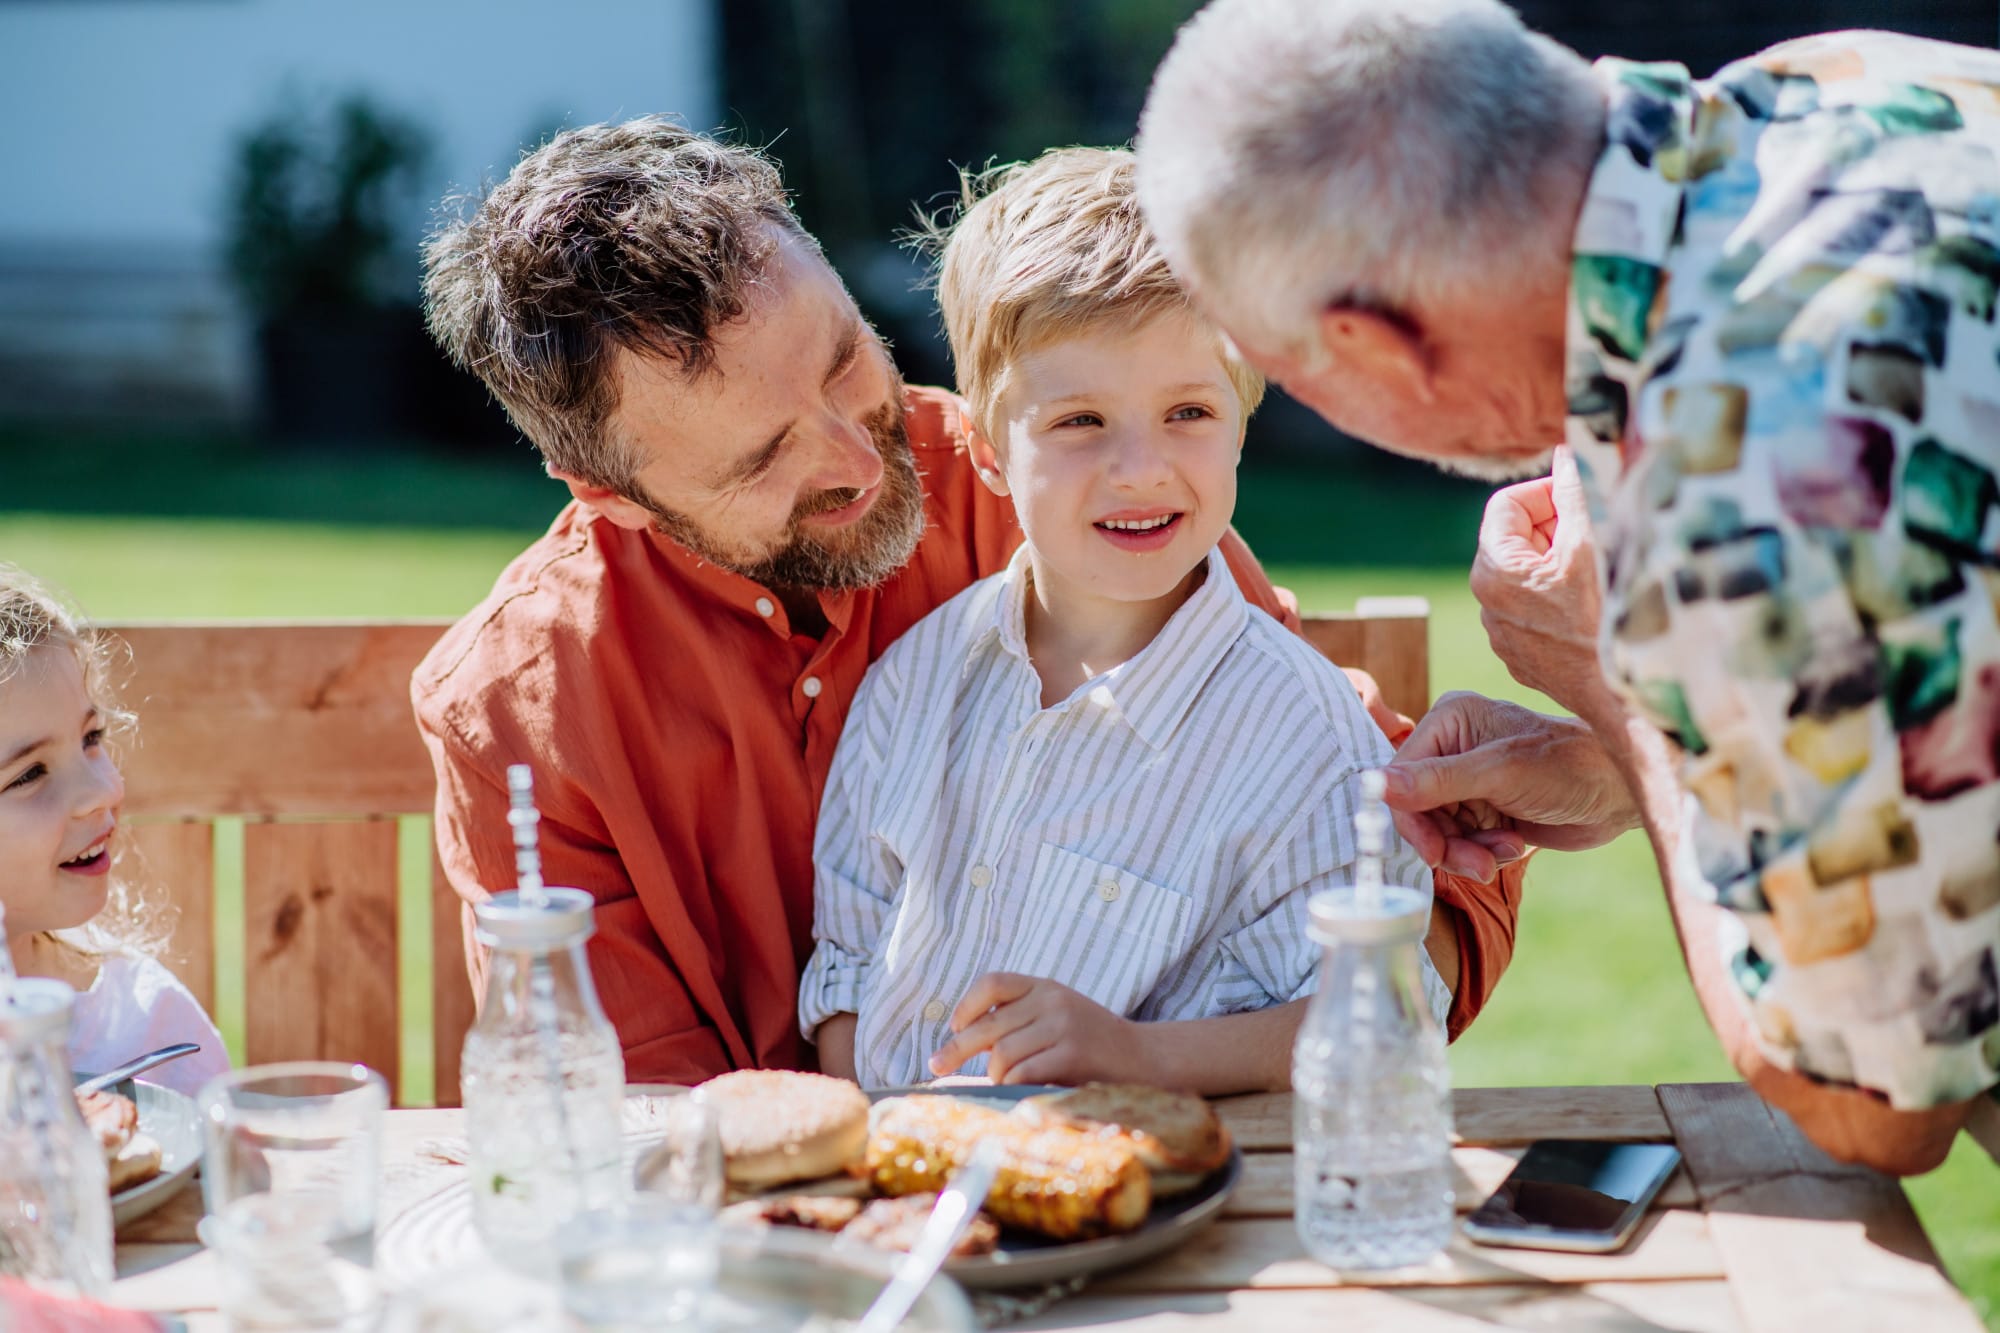 Planning for retirement: this happy scene shows father, son and grandfather at a barbecue